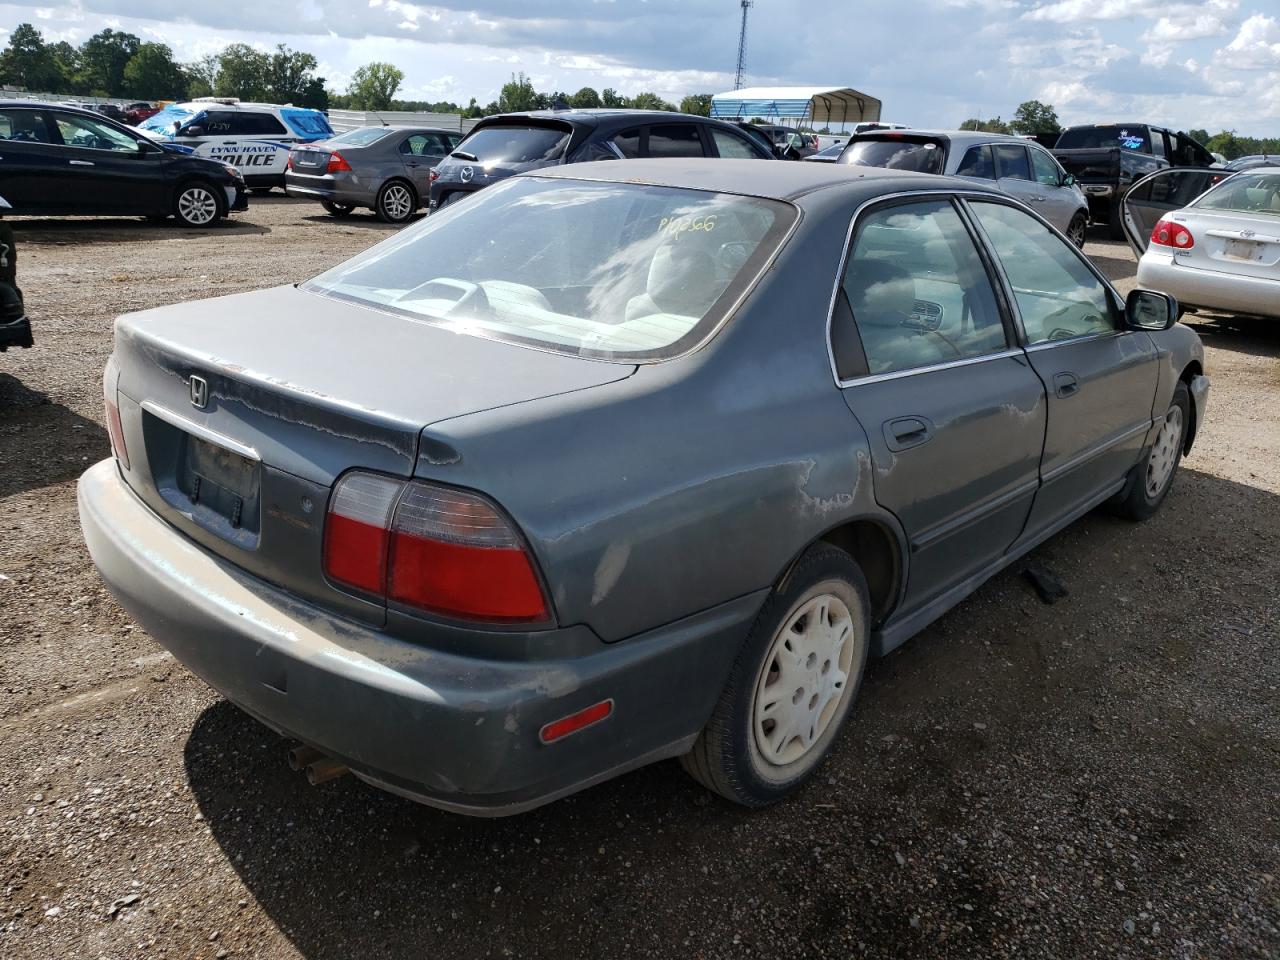 1HGCD5696TA****** Salvage and Wrecked 1996 Honda Accord in Alabama State